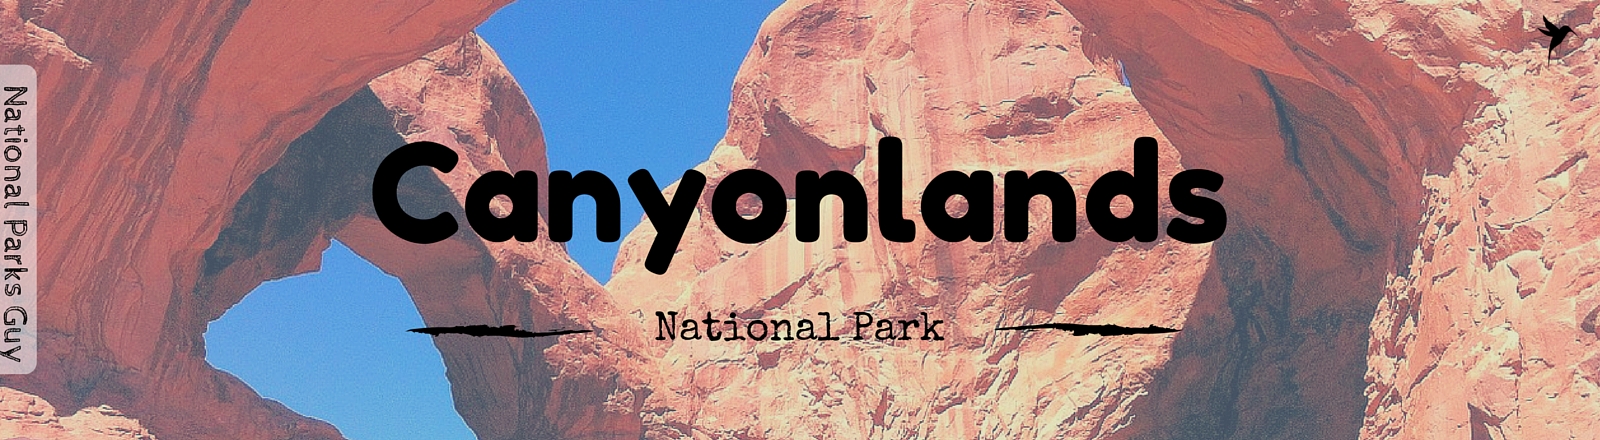 Canyonlands National Park, USA, National Parks Guy, Stories, Tales, Adventures, Wildlife